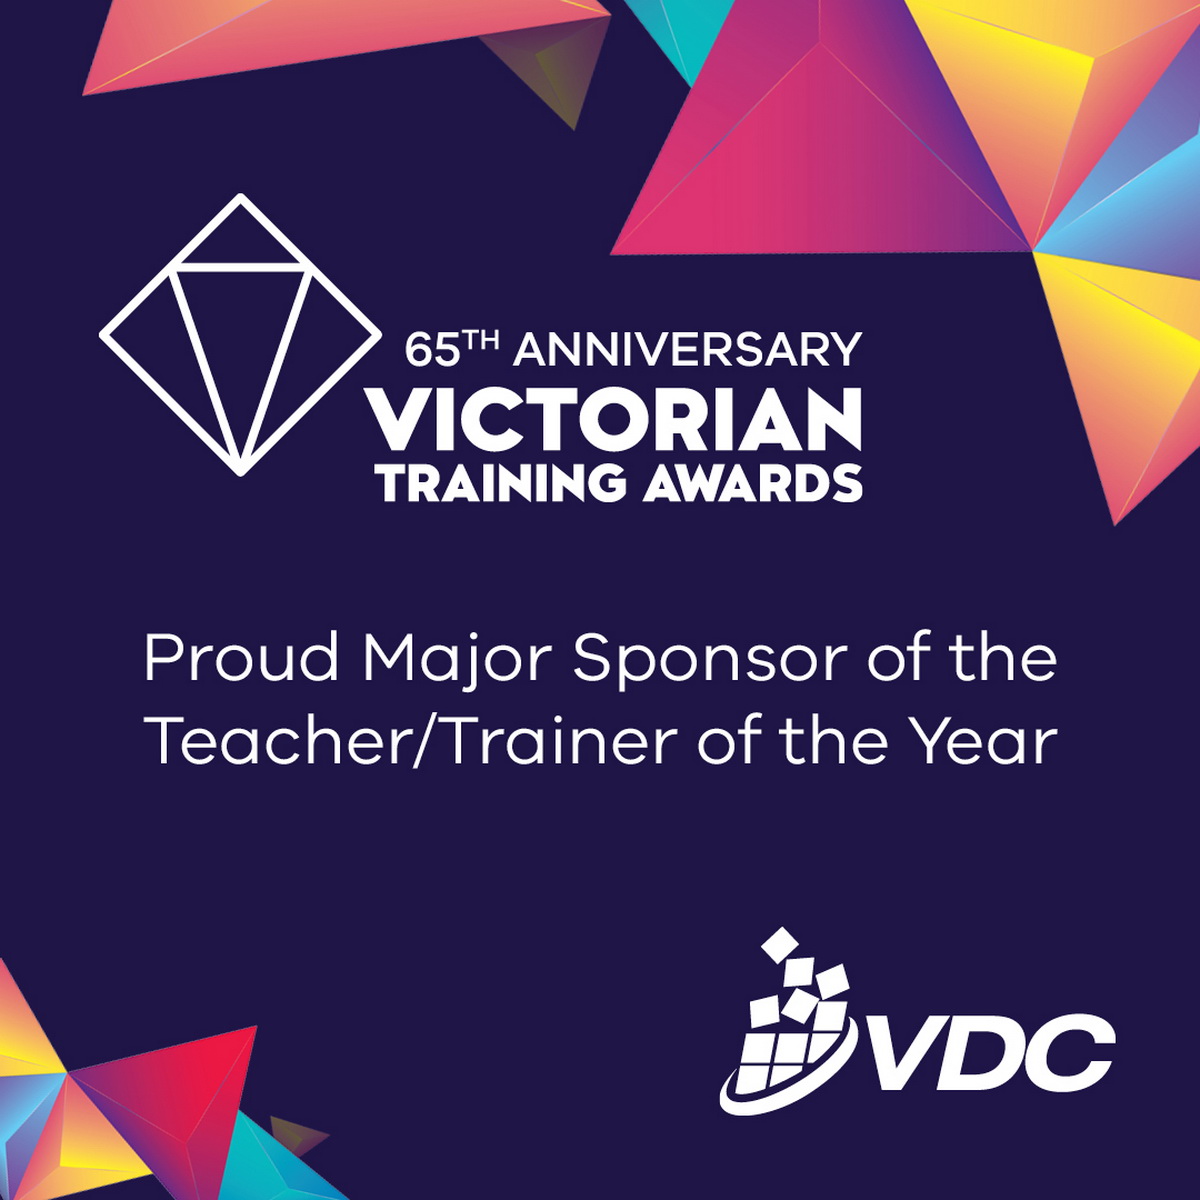 CEO Message - VDC at Victorian Training Awards